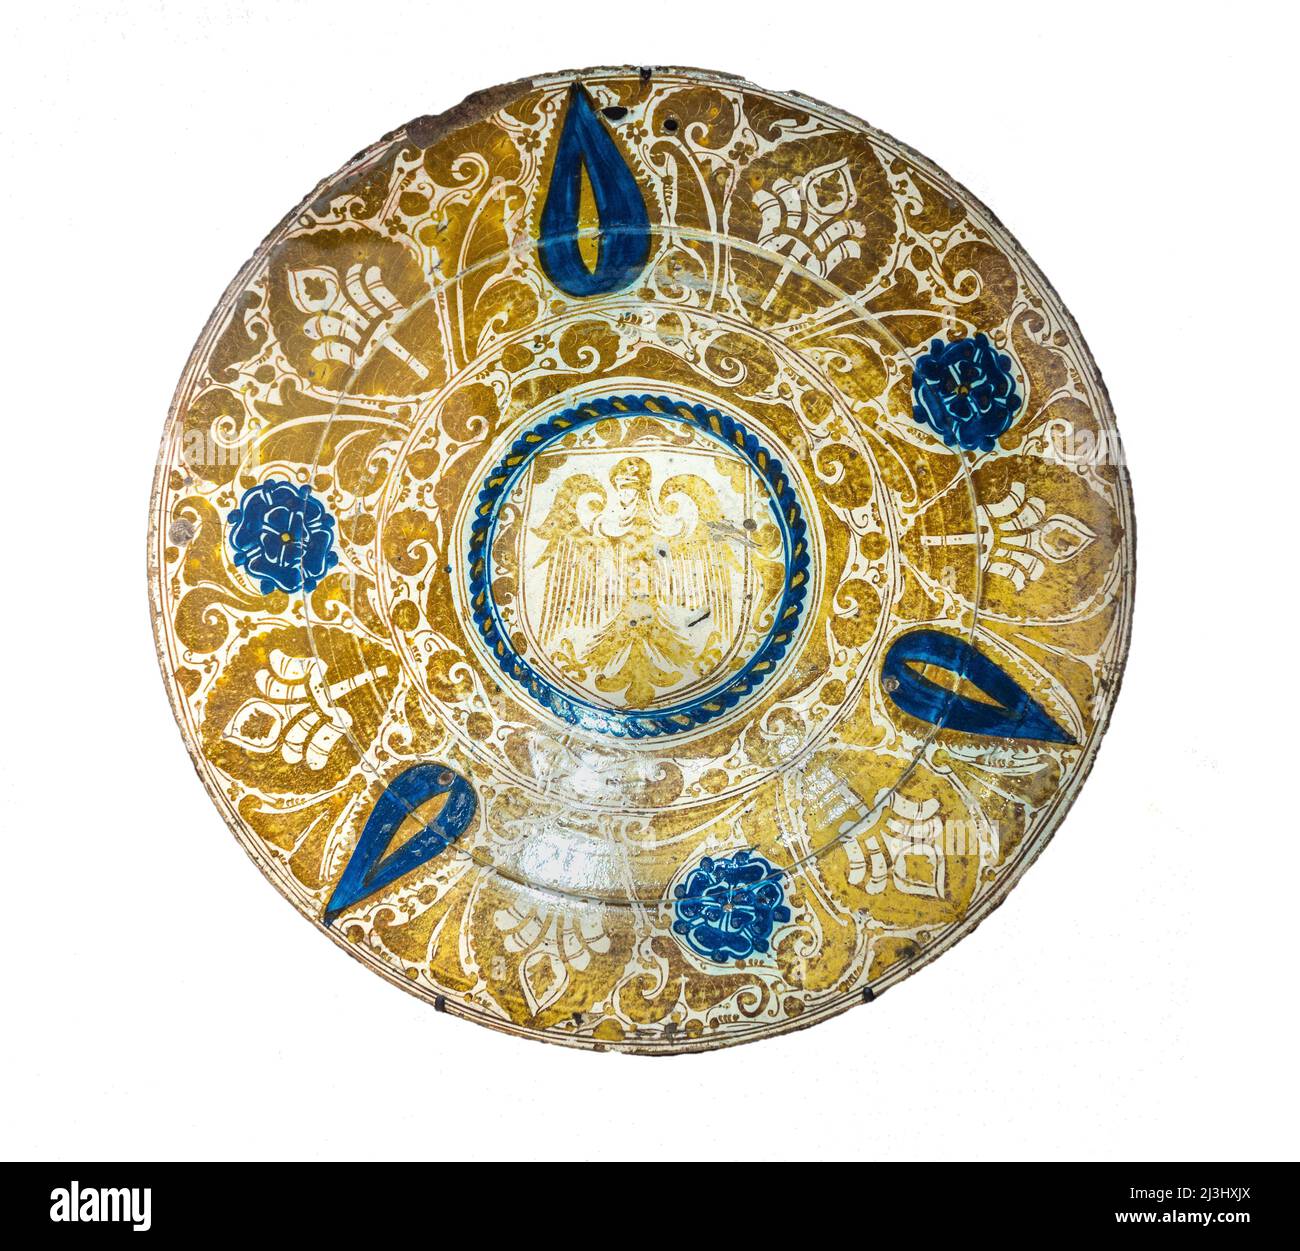 Mudejar, ceramic dish with  lustreware glaze, 15th century, from Manises, Valencia, Spain.  Manisan lusterware was influenced by Islamic designs  by M Stock Photo